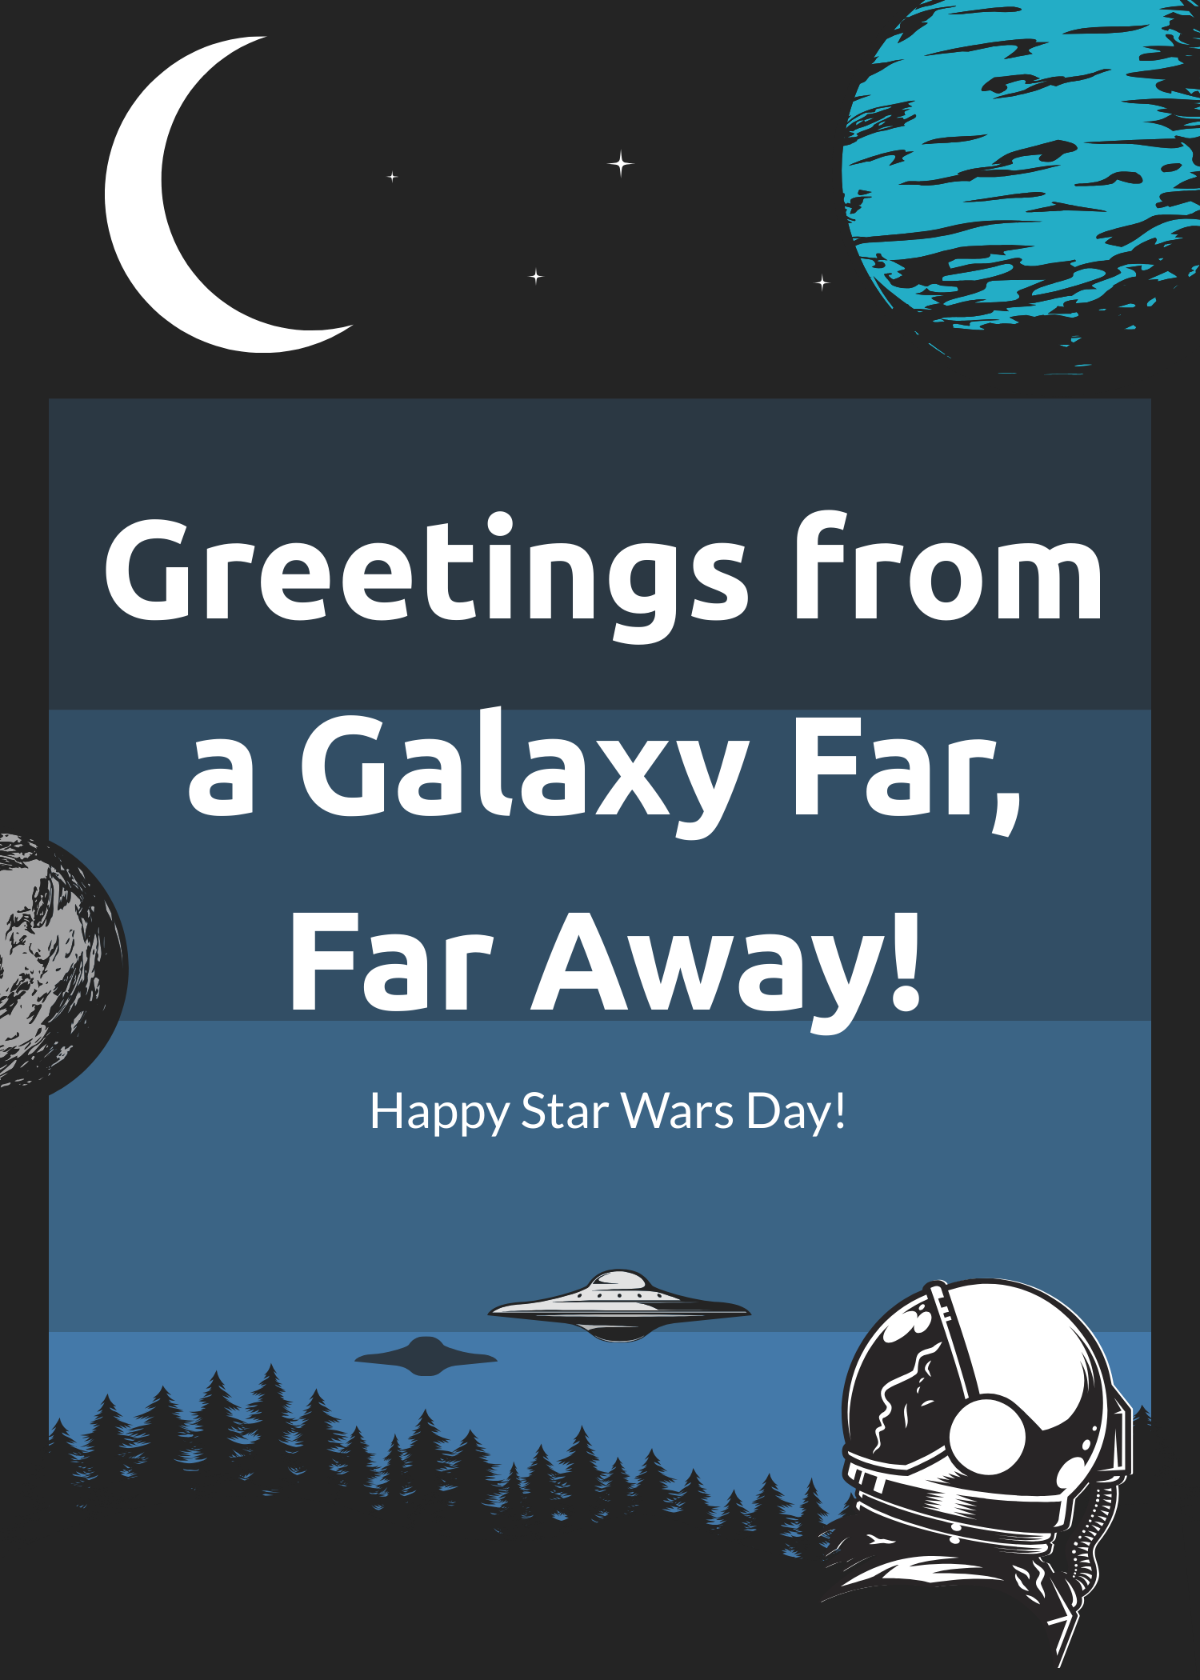 Star Wars Day Greeting Card Template